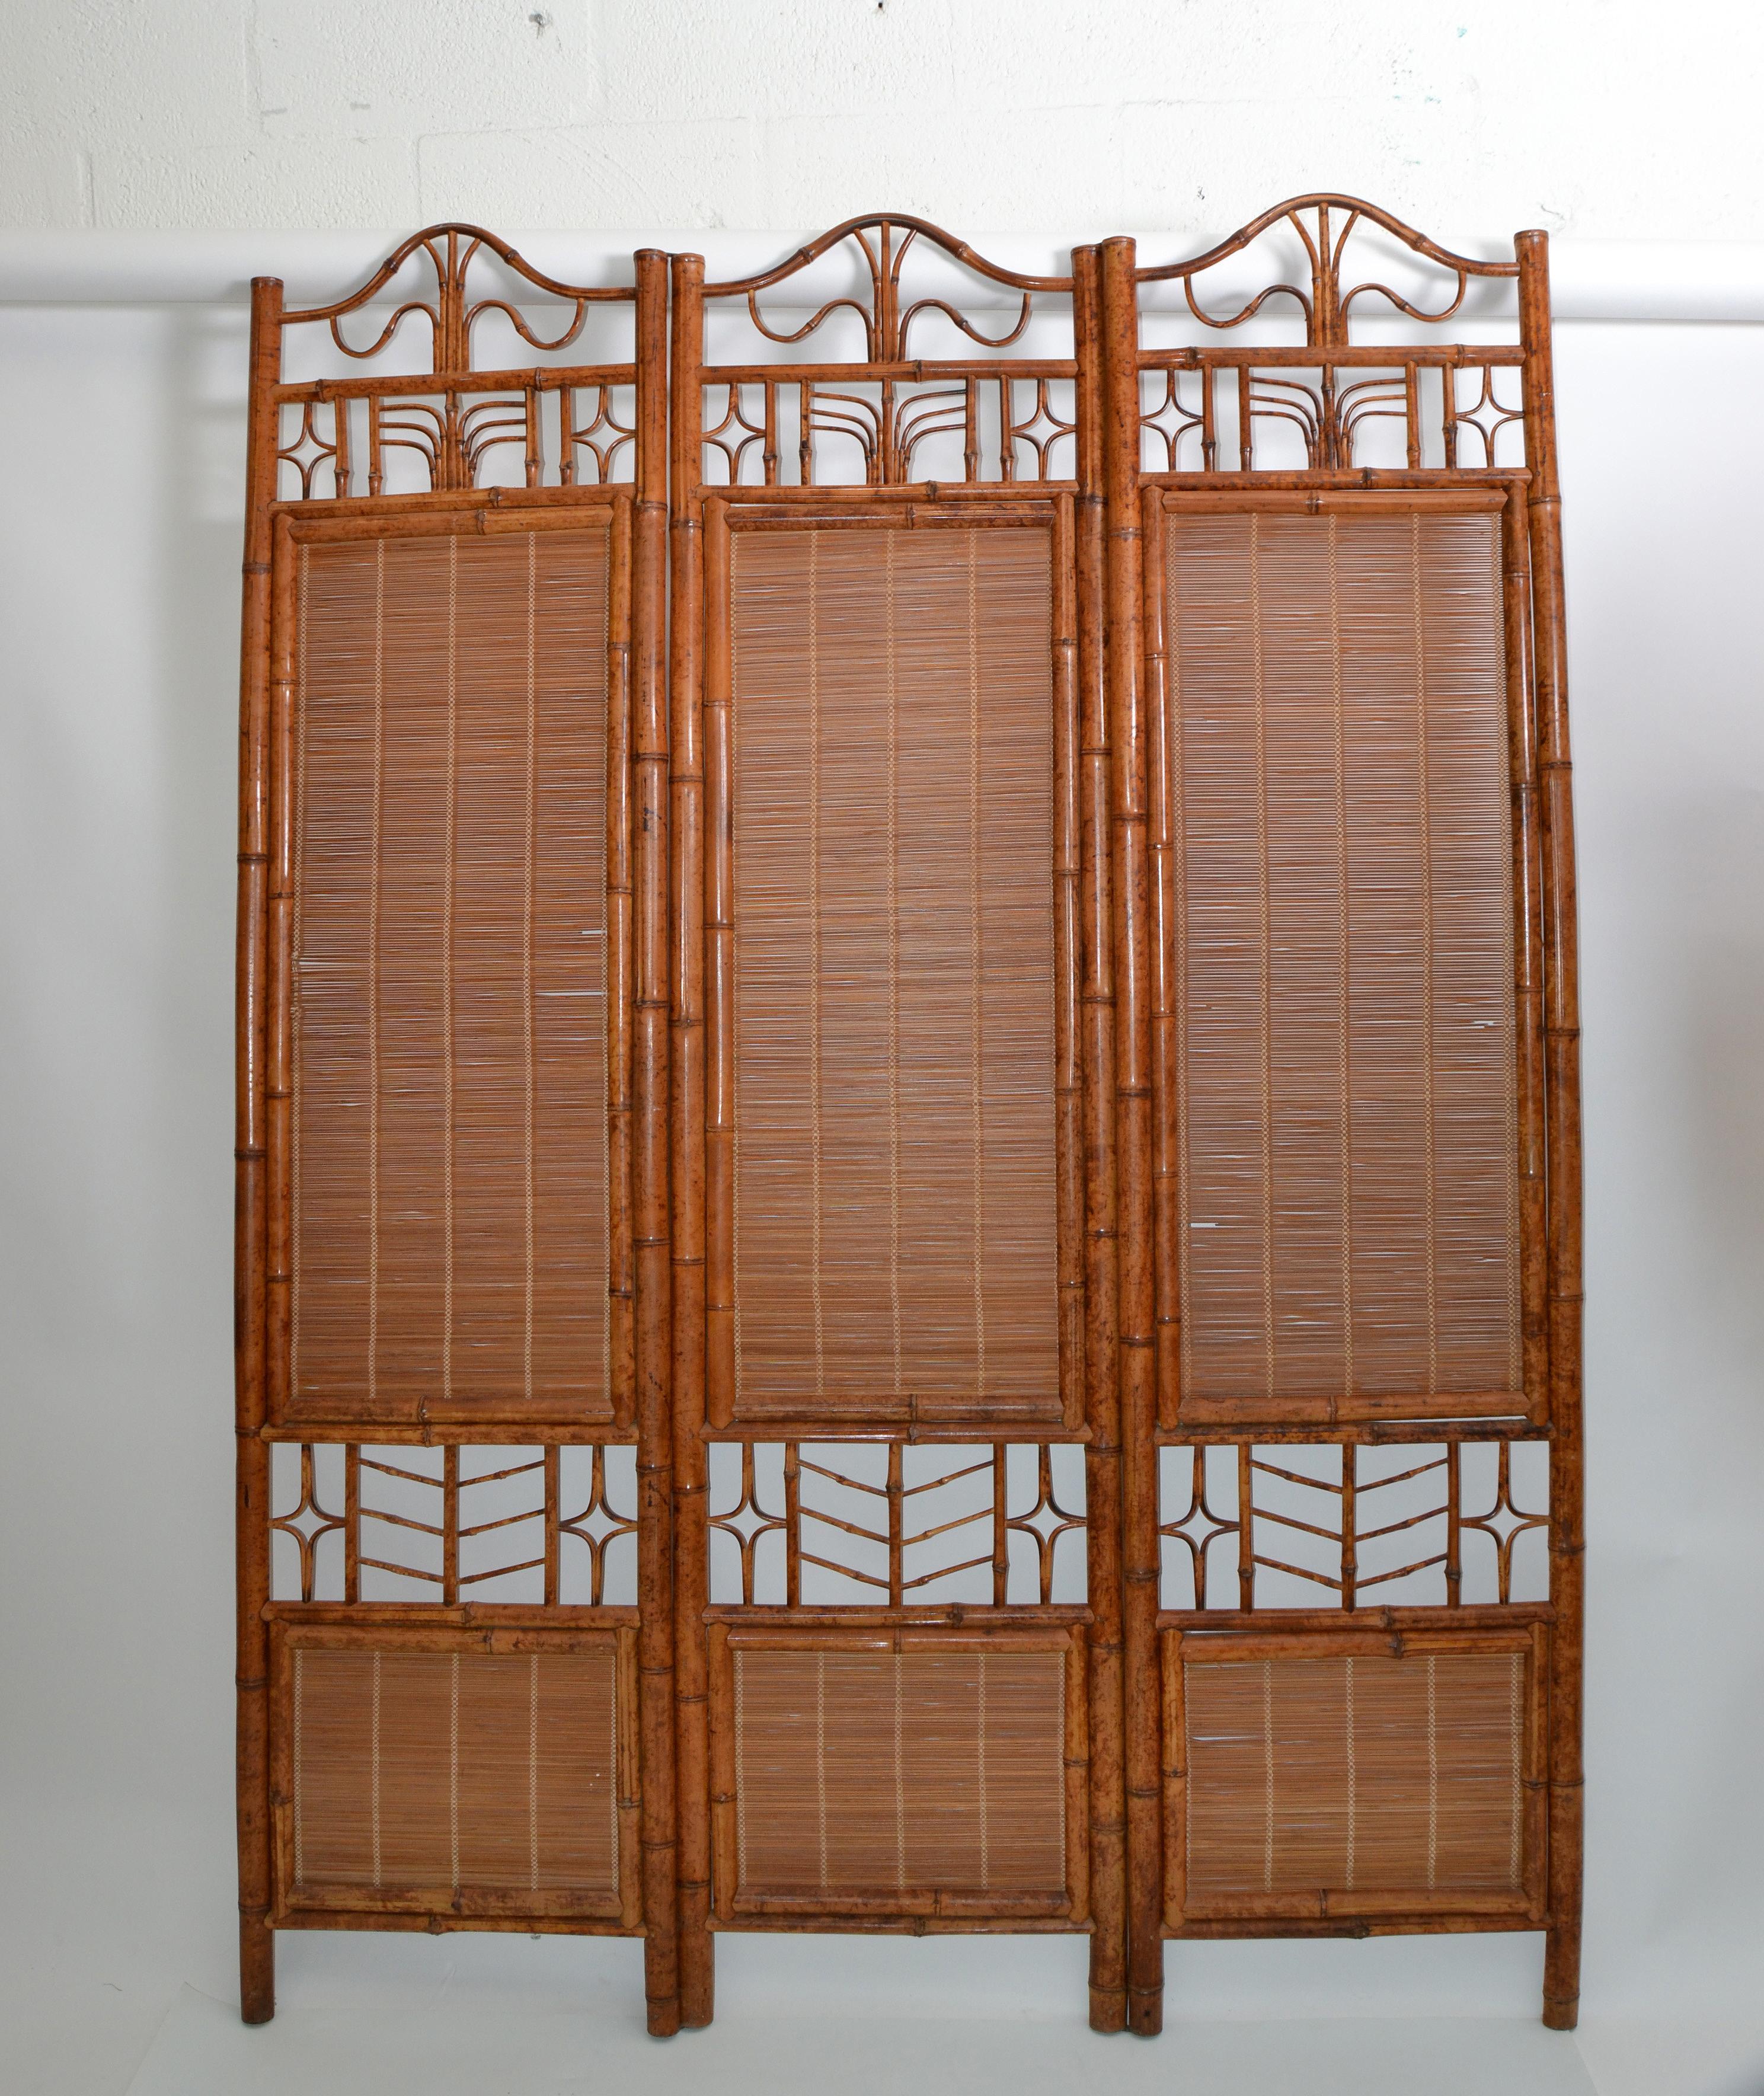 One Mid-Century Modern Tall Solid Bamboo Wood Room Divider Screen Partition For Sale 5